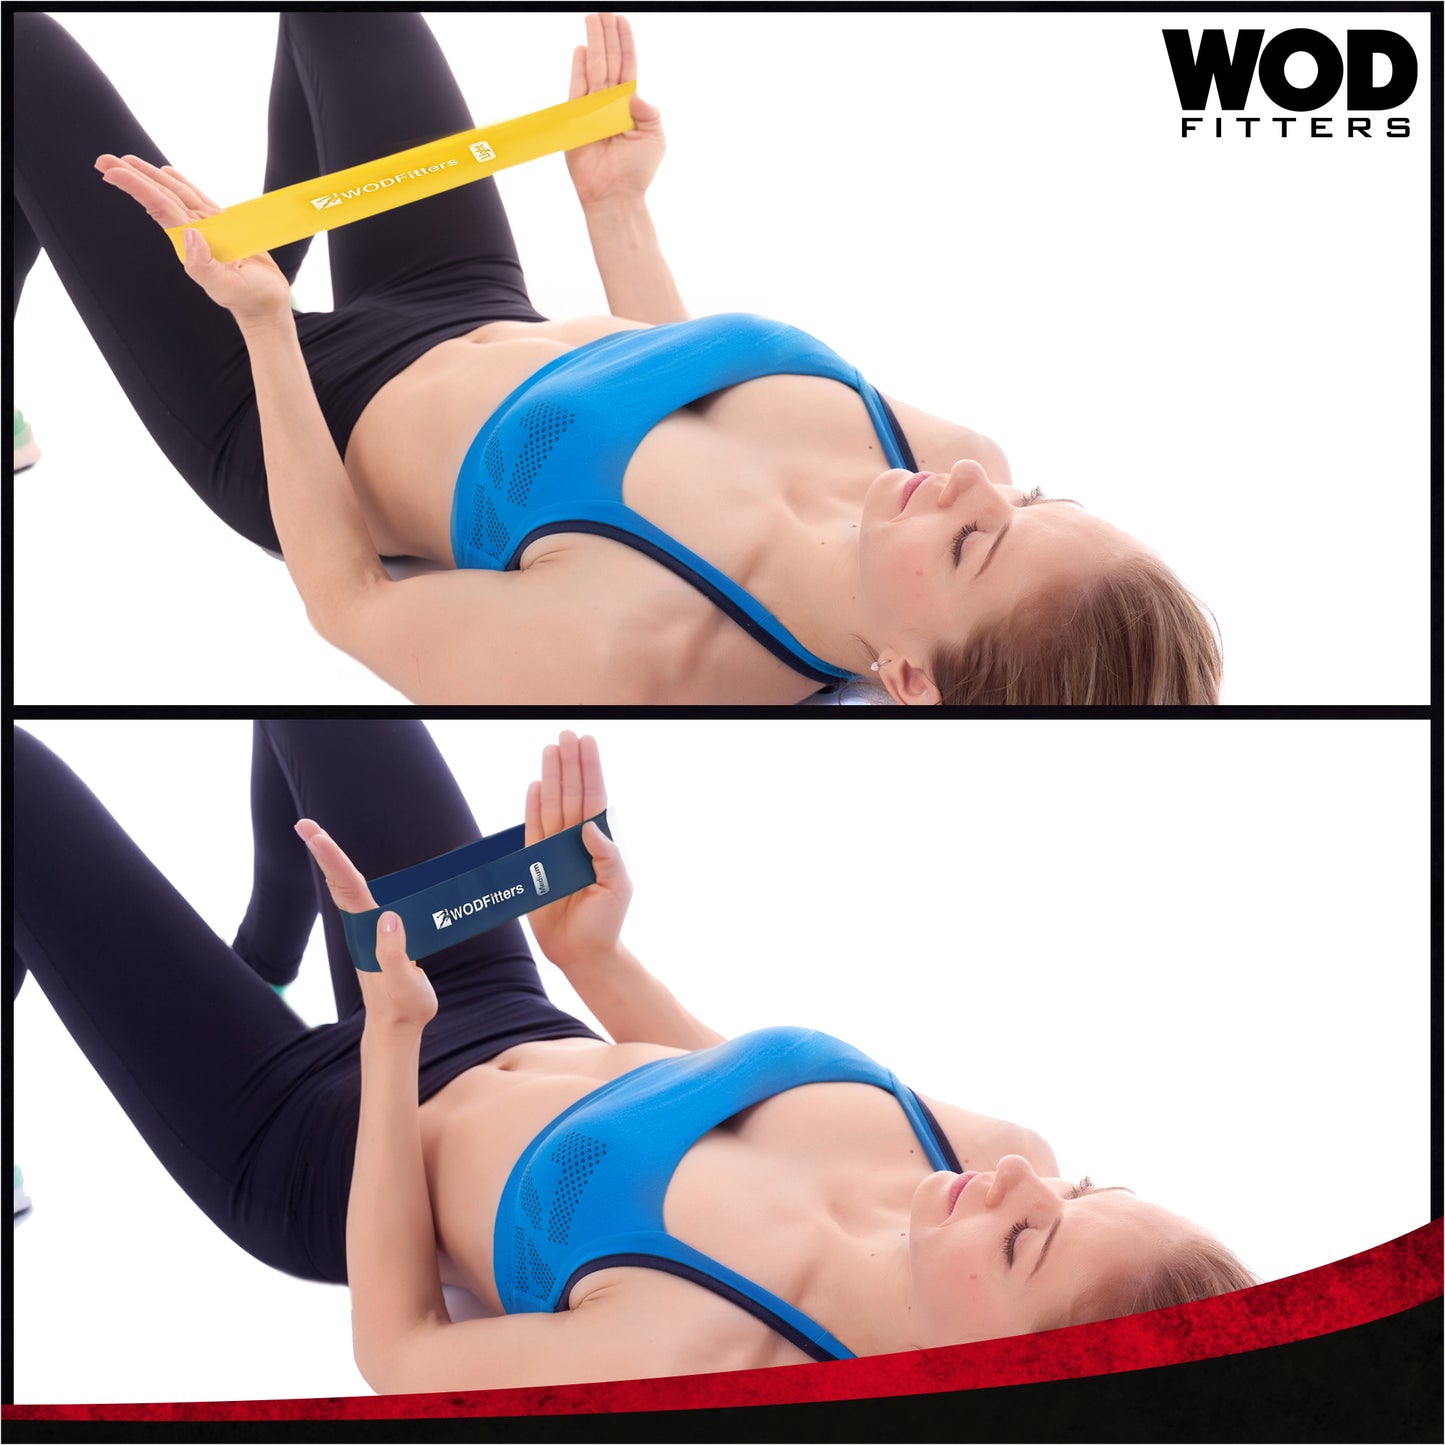 WODFitters Mini Bands Set - 5 Exercise and Workout Resistance Bands for Muscle Activation, Arms and Legs